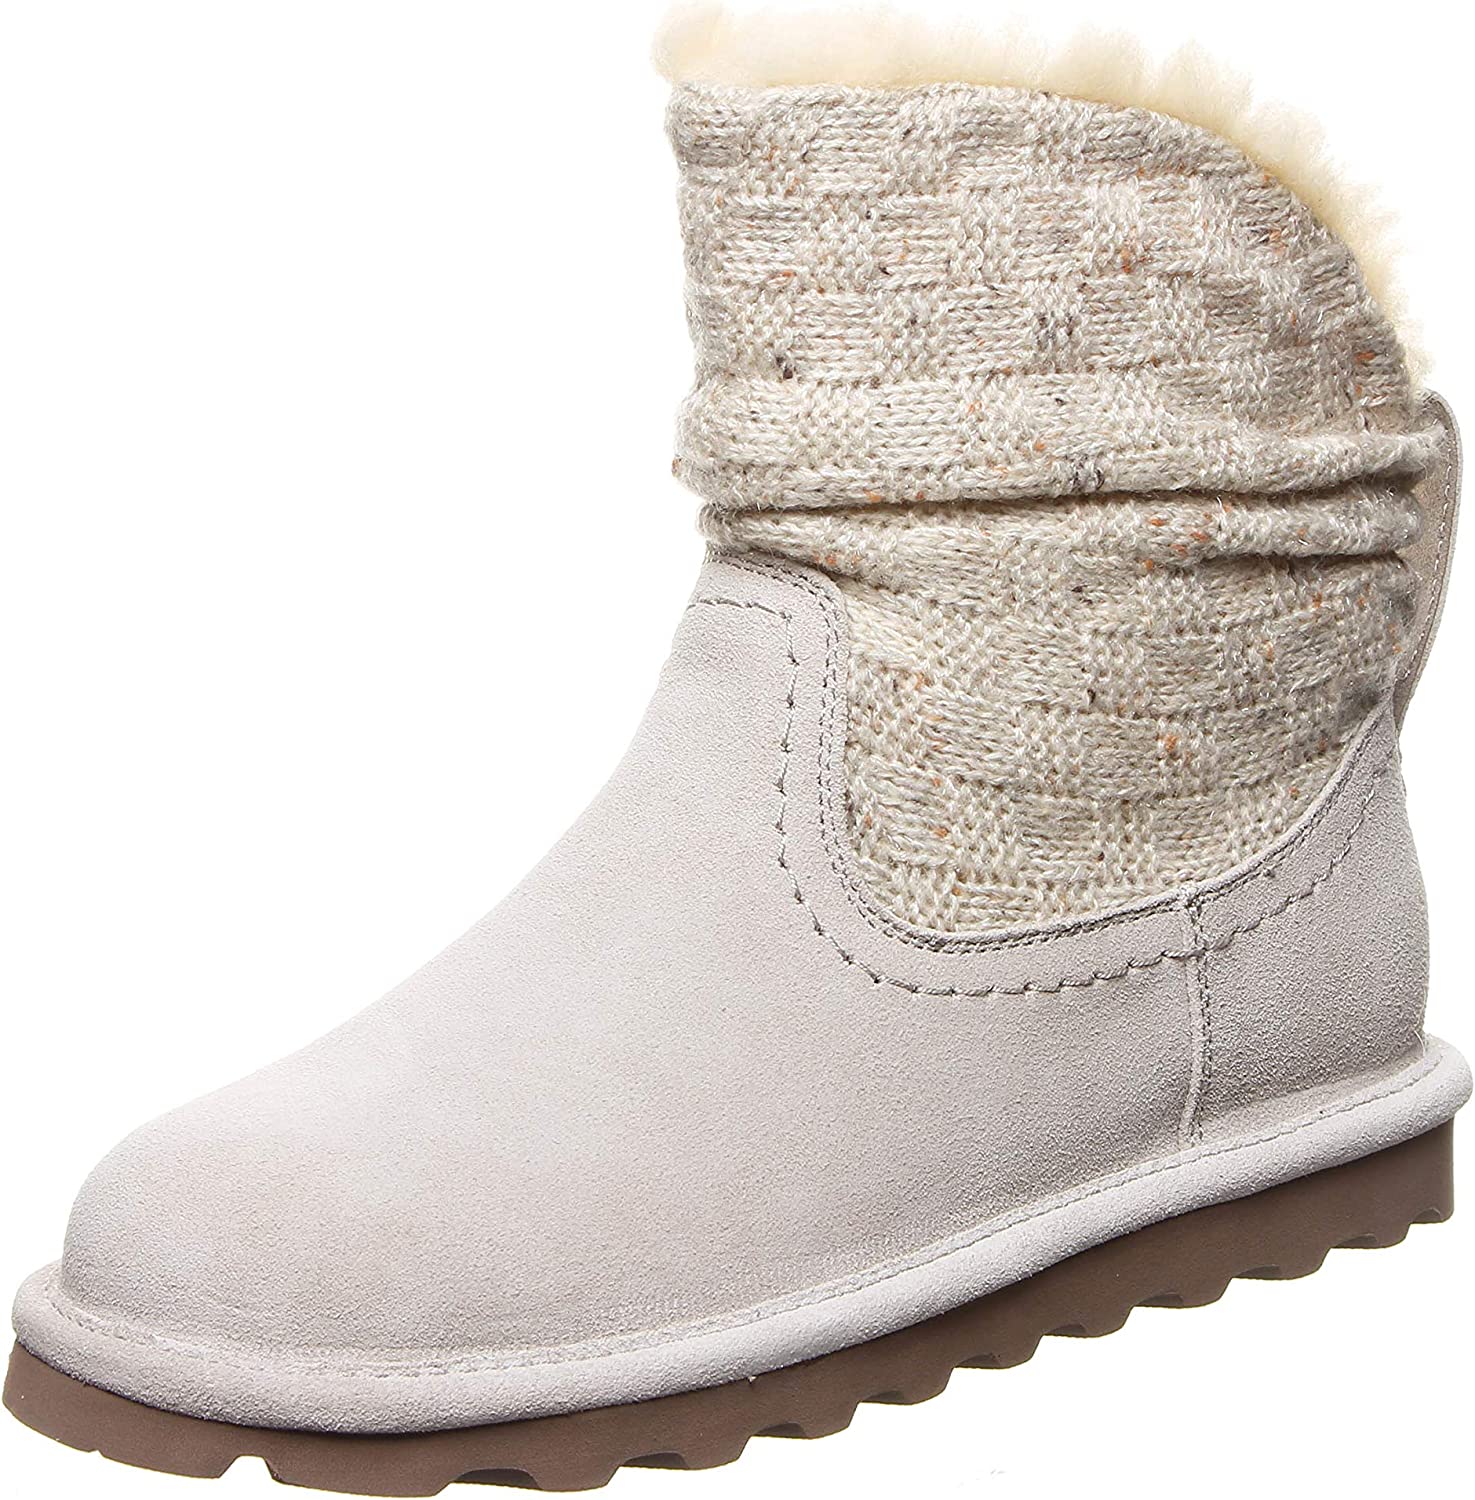 Bearpaw Womens Virginia Knitted Winter Boots - Winter White - 7